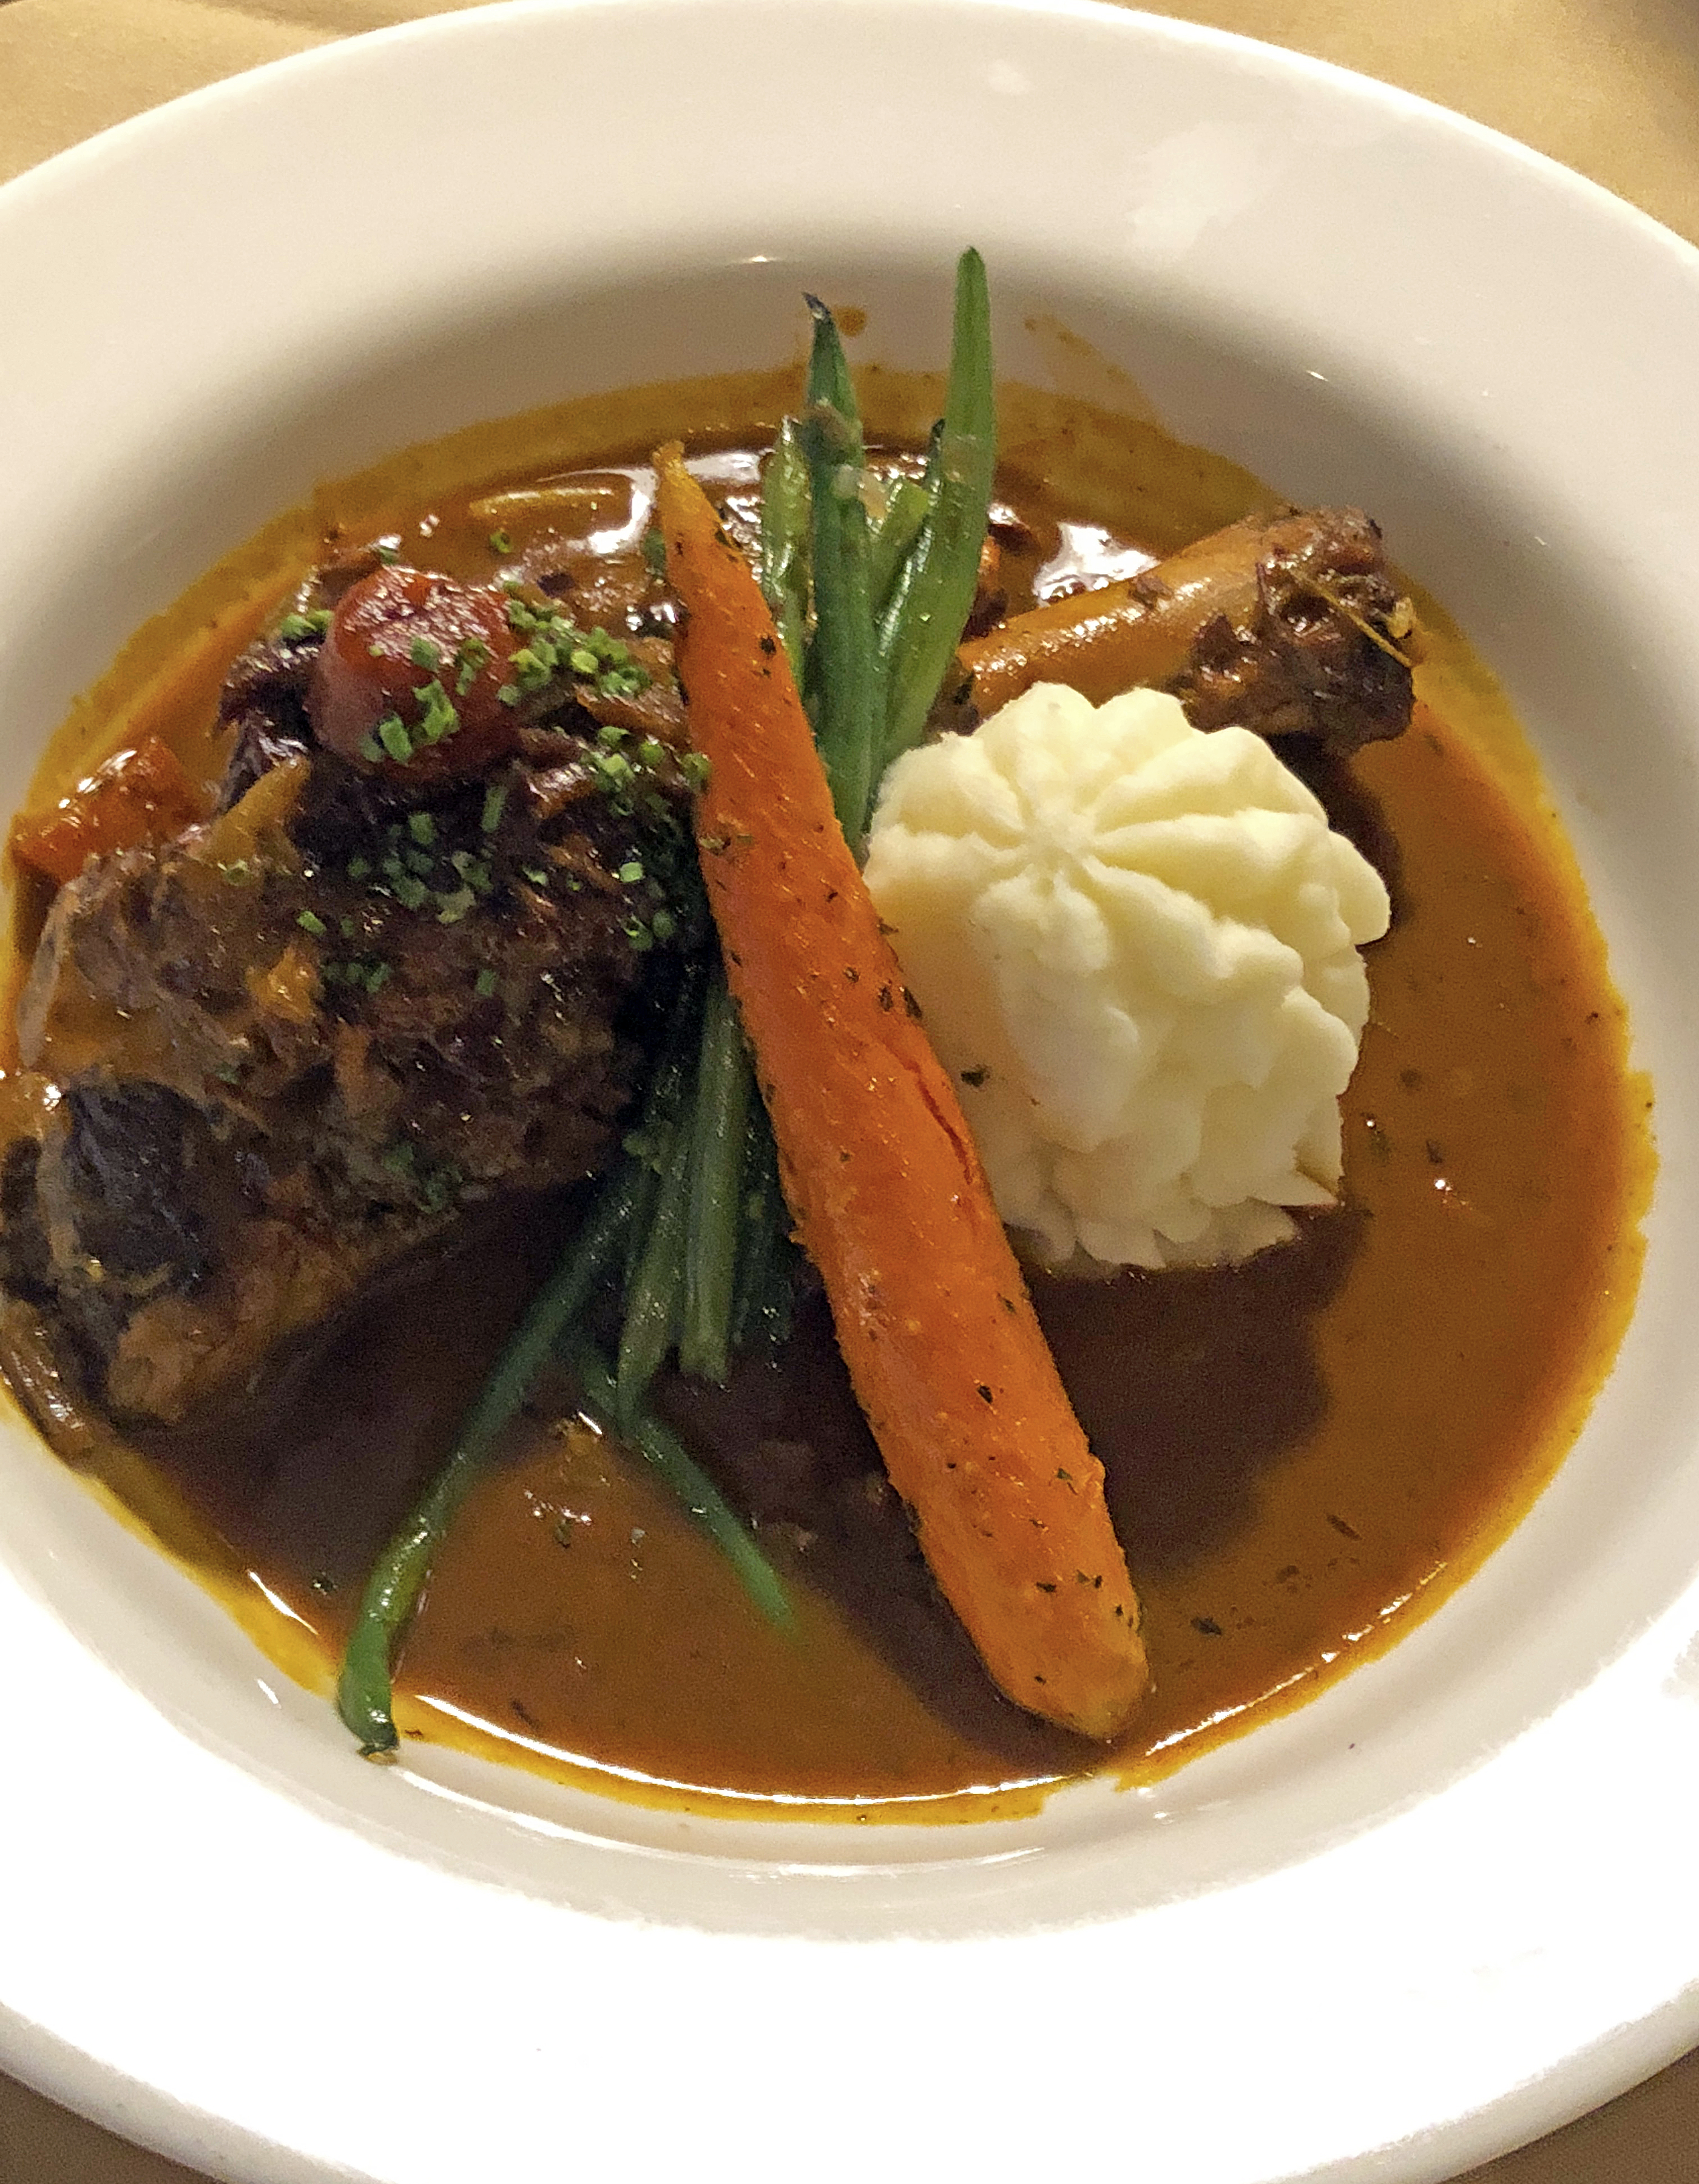 Anoosh Bistro’s braised lamb shank with mashed potatoes.Anoosh Bistro’s braised lamb shank with mashed potatoes.